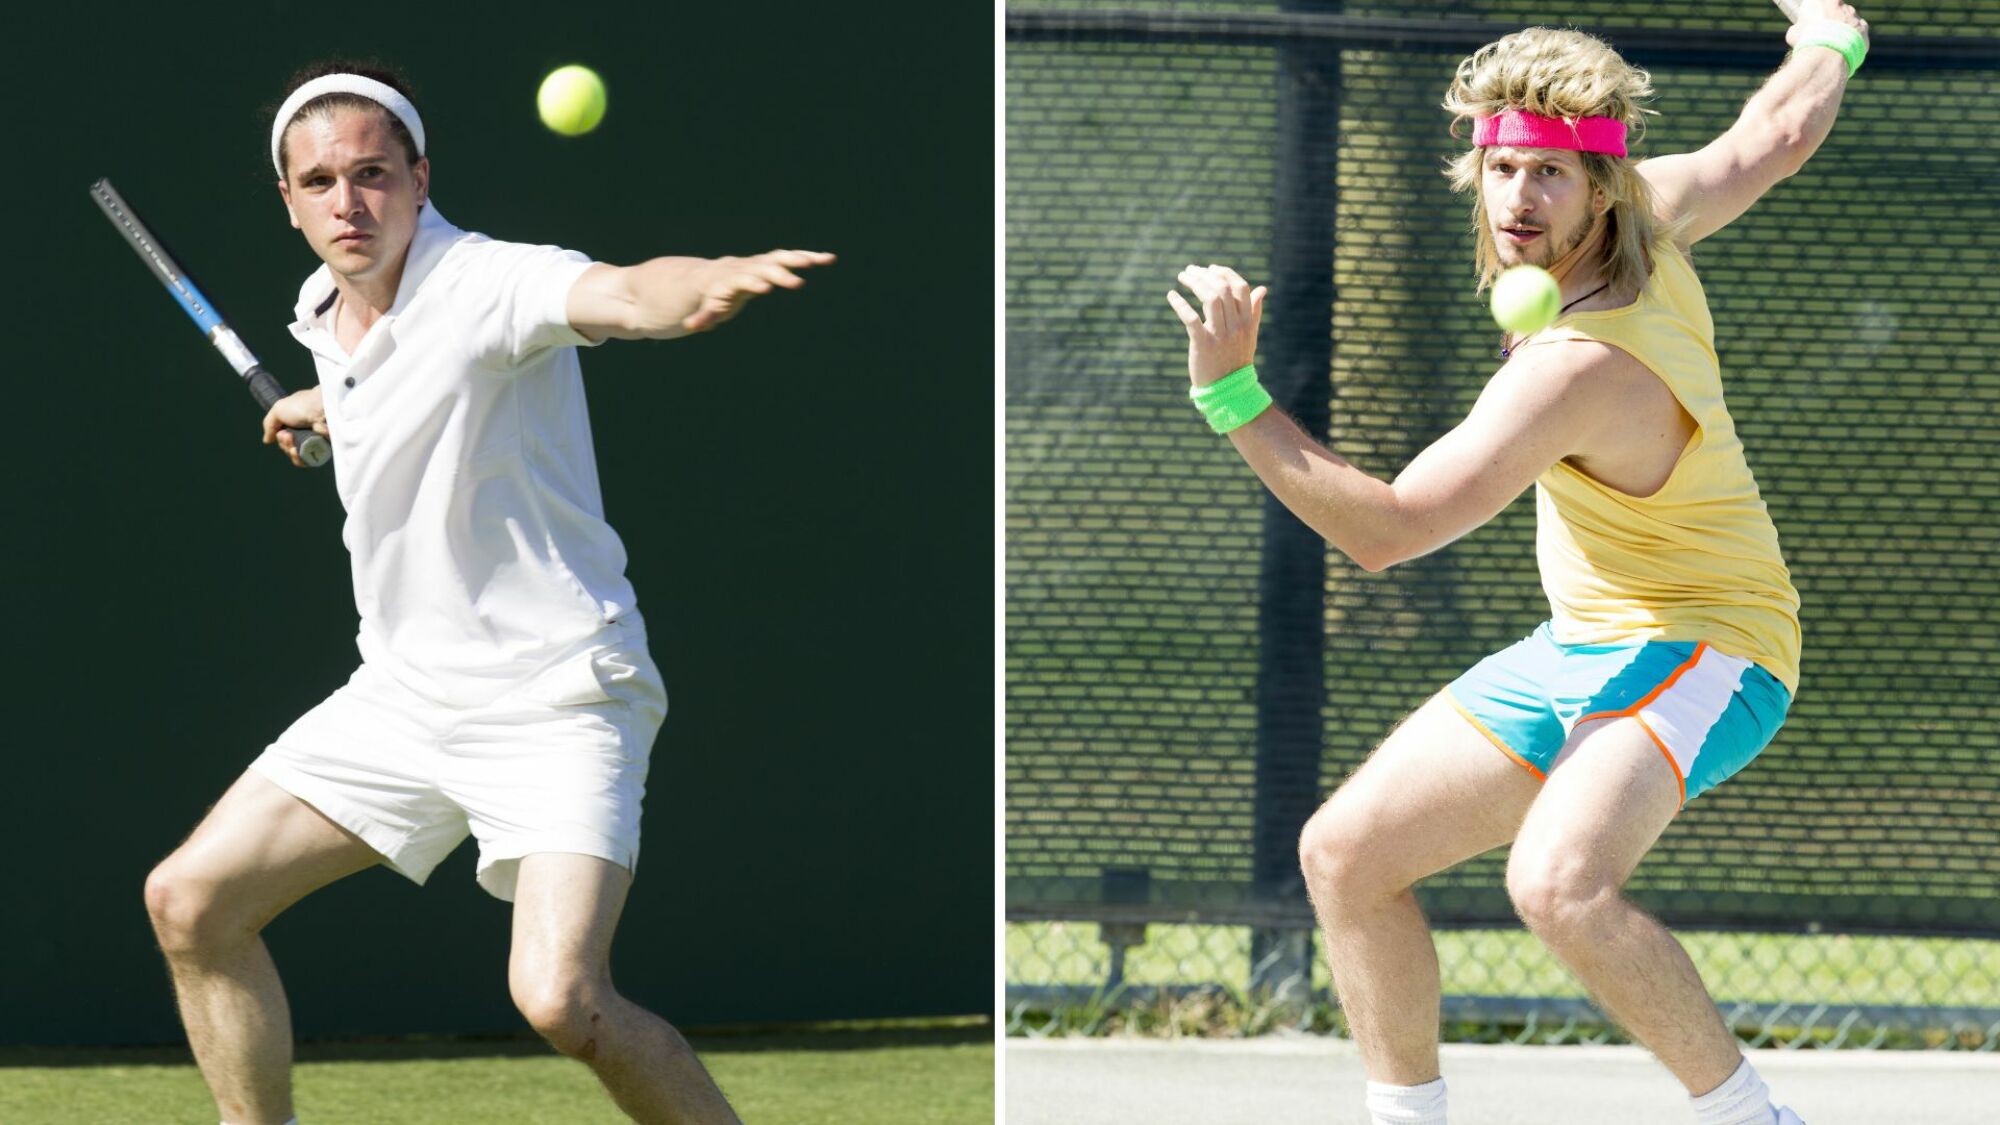 Two tennis players — one in an all-white uniform, one in a neon tank top and shorts — playing tennis.